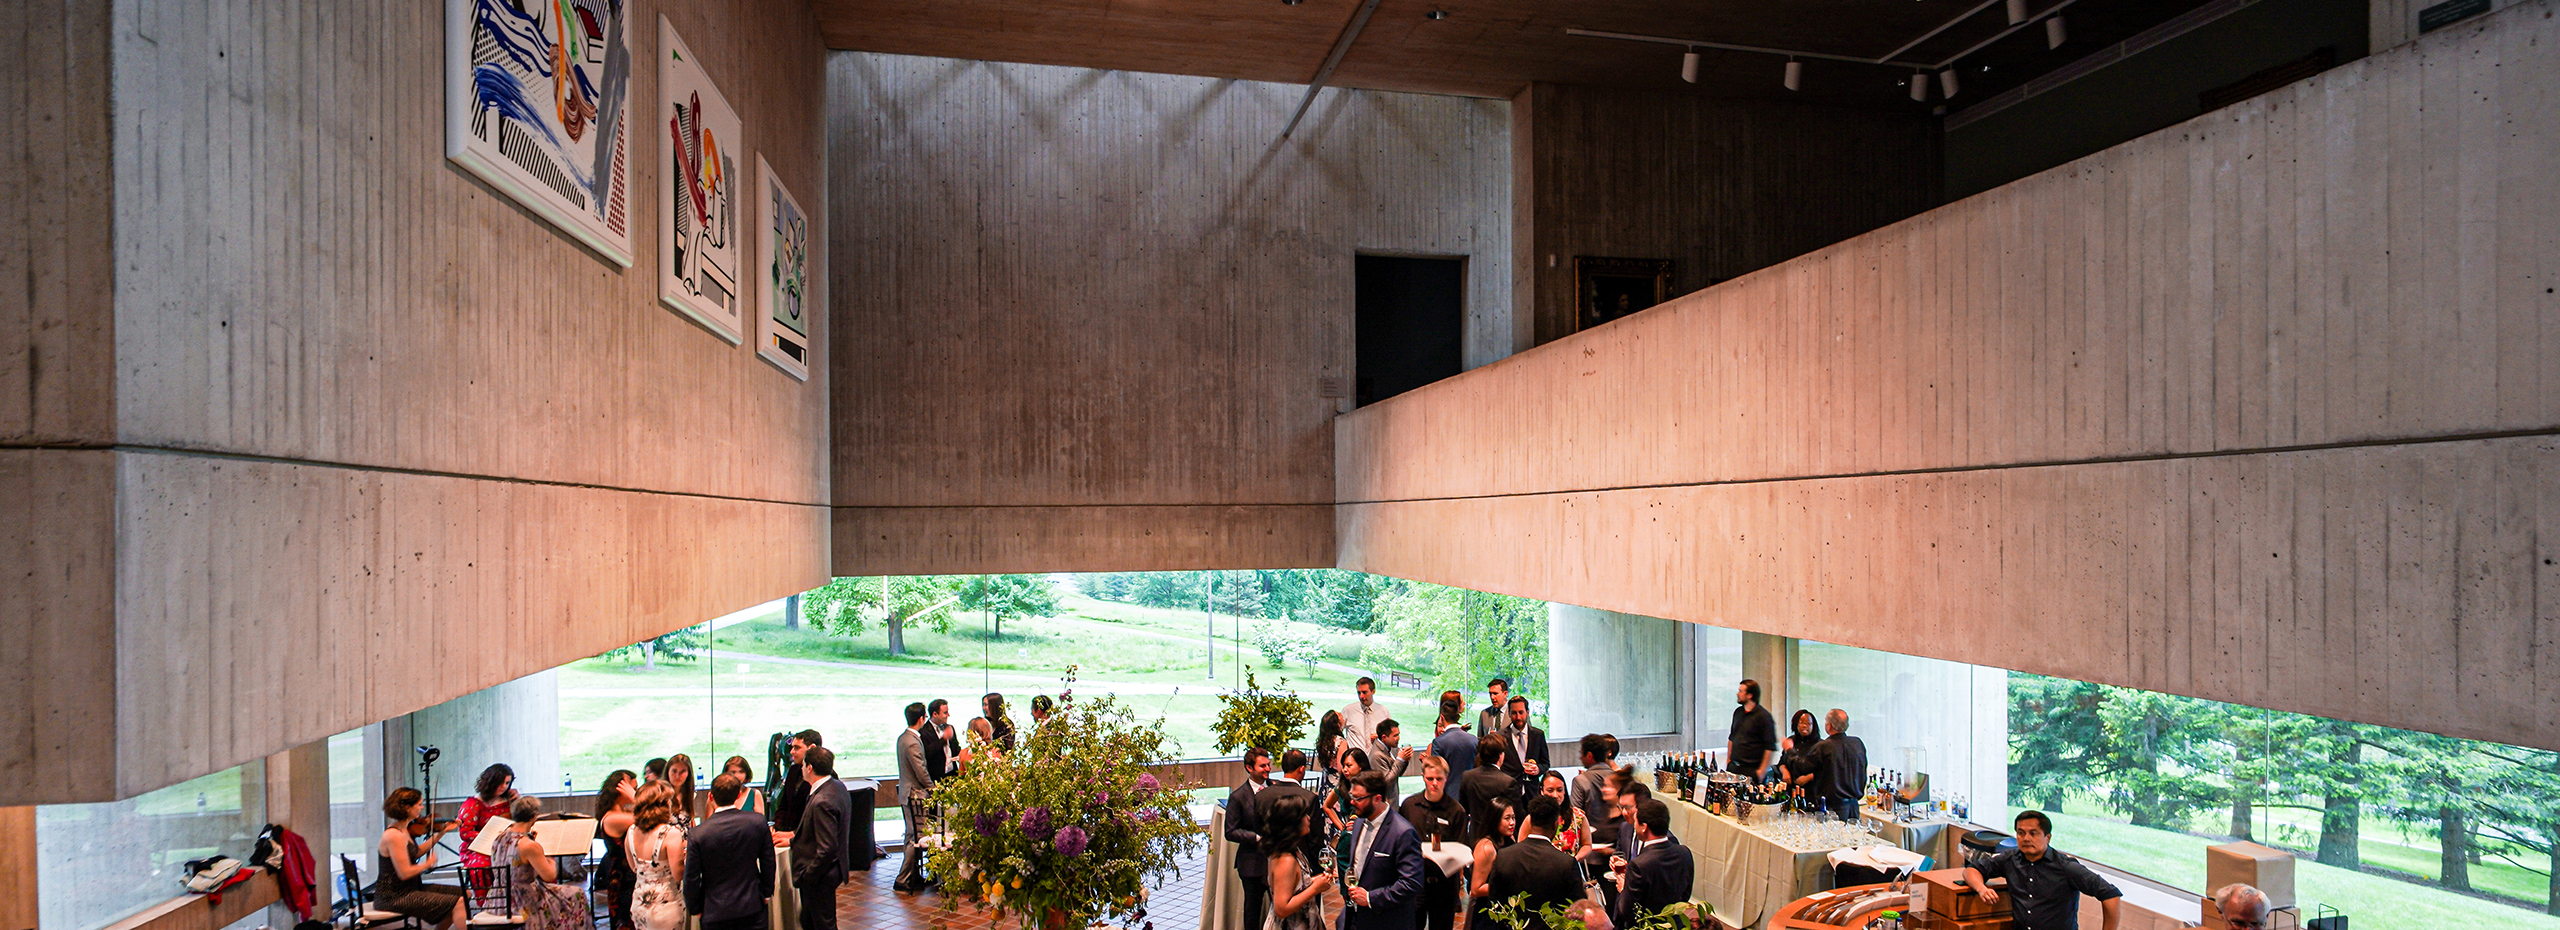 People gather in a large lobby with wide windows, concrete walls, and large paintings